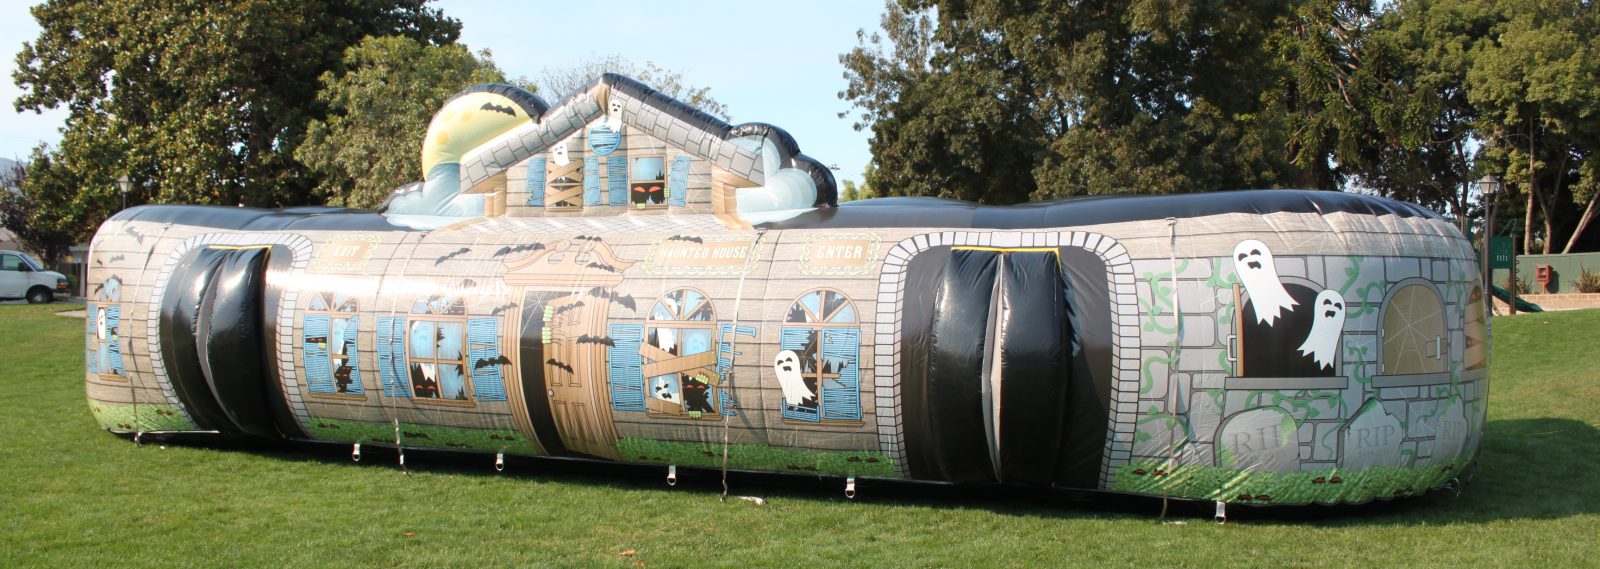 Haunted House Inflatable Rental Lets Party